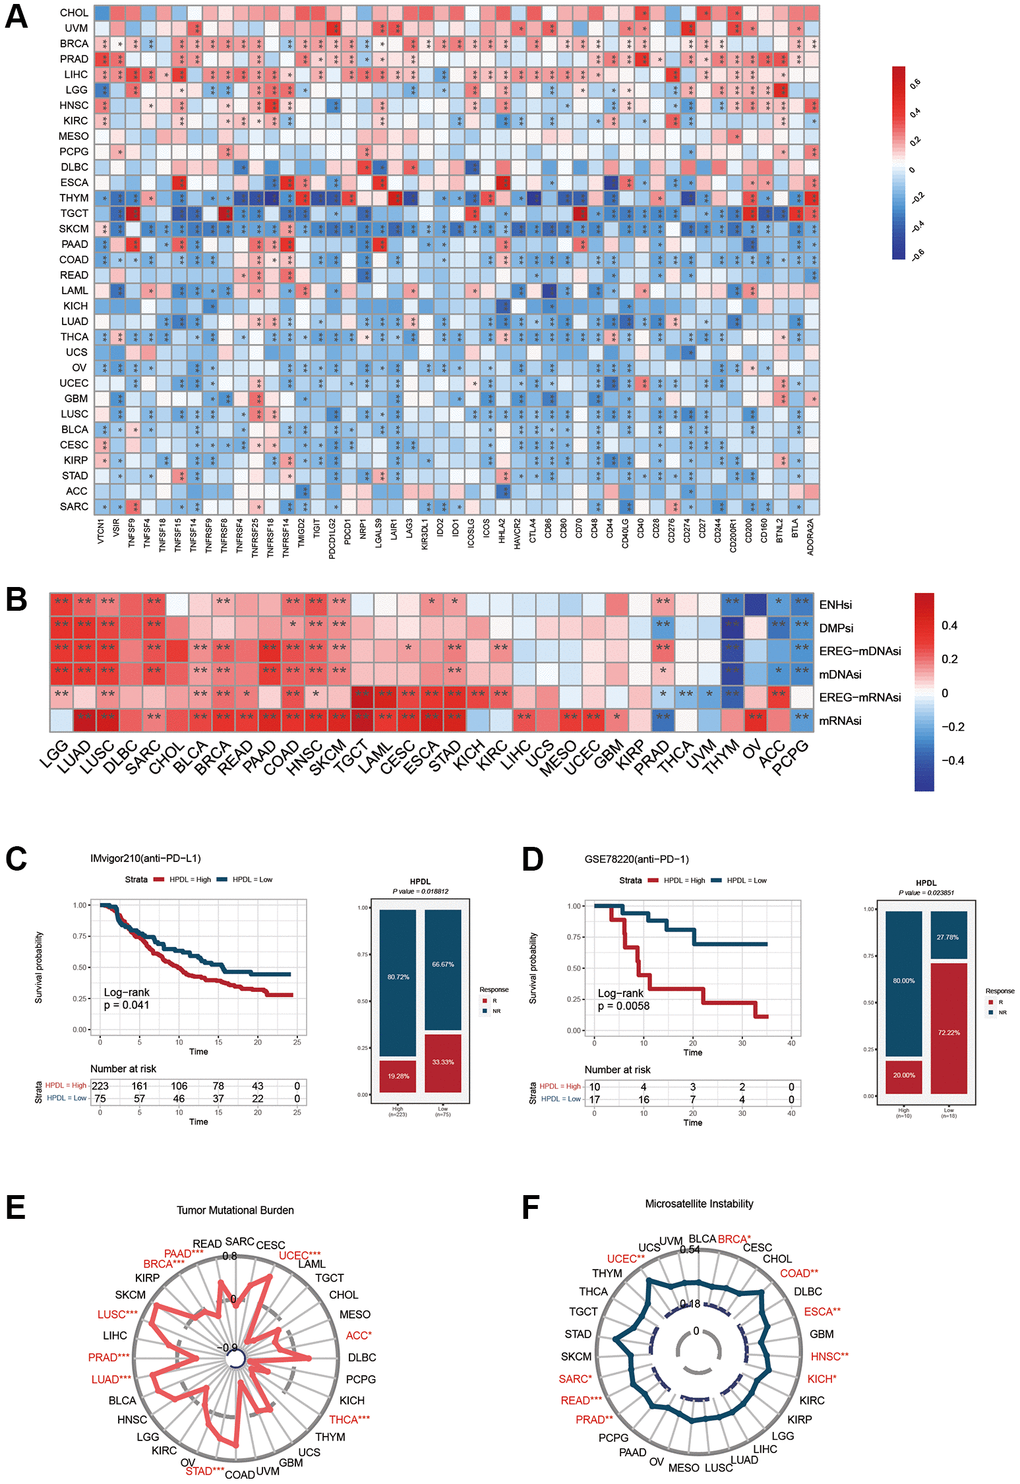 Influence of HPDL expression on anti-tumor immunity and immunotherapy response. (A) The Spearman correlation heatmap shows the correlation between the expression of HPDL and 47 kinds of immune regulators in pan-cancer. Red represents positive correlation and blue represents negative correlation. (B) The correlation between HPDL expression and the ENHsi, DMPsi, EREG-mDNAsi, mDNAsi, EREG-mRNAsi, and mRNAsi. (C) Kaplan-Meier curve of low and high-HPDL subgroup in IMvigor210 cohort (anti-PD-L1), and the proportion of tumors (including kidney cancer) in the low-HPDL and high-HPDL subgroups in the IMvigor210 cohort who responded to PD-1 therapy. (D) Kaplan-Meier curve of GSE78220 (anti-PD-1 melanoma) in the low and high-HPDL patient groups, and the proportion of melanoma patients in the GSE78220 low and high-HPDL subgroups that responded to anti-PD-1 therapy. (E, F) The correlation between HPDL expression and the TMB (E), and MSI (F). The labelled asterisk indicated the statistical p-value (*p **p ***p 